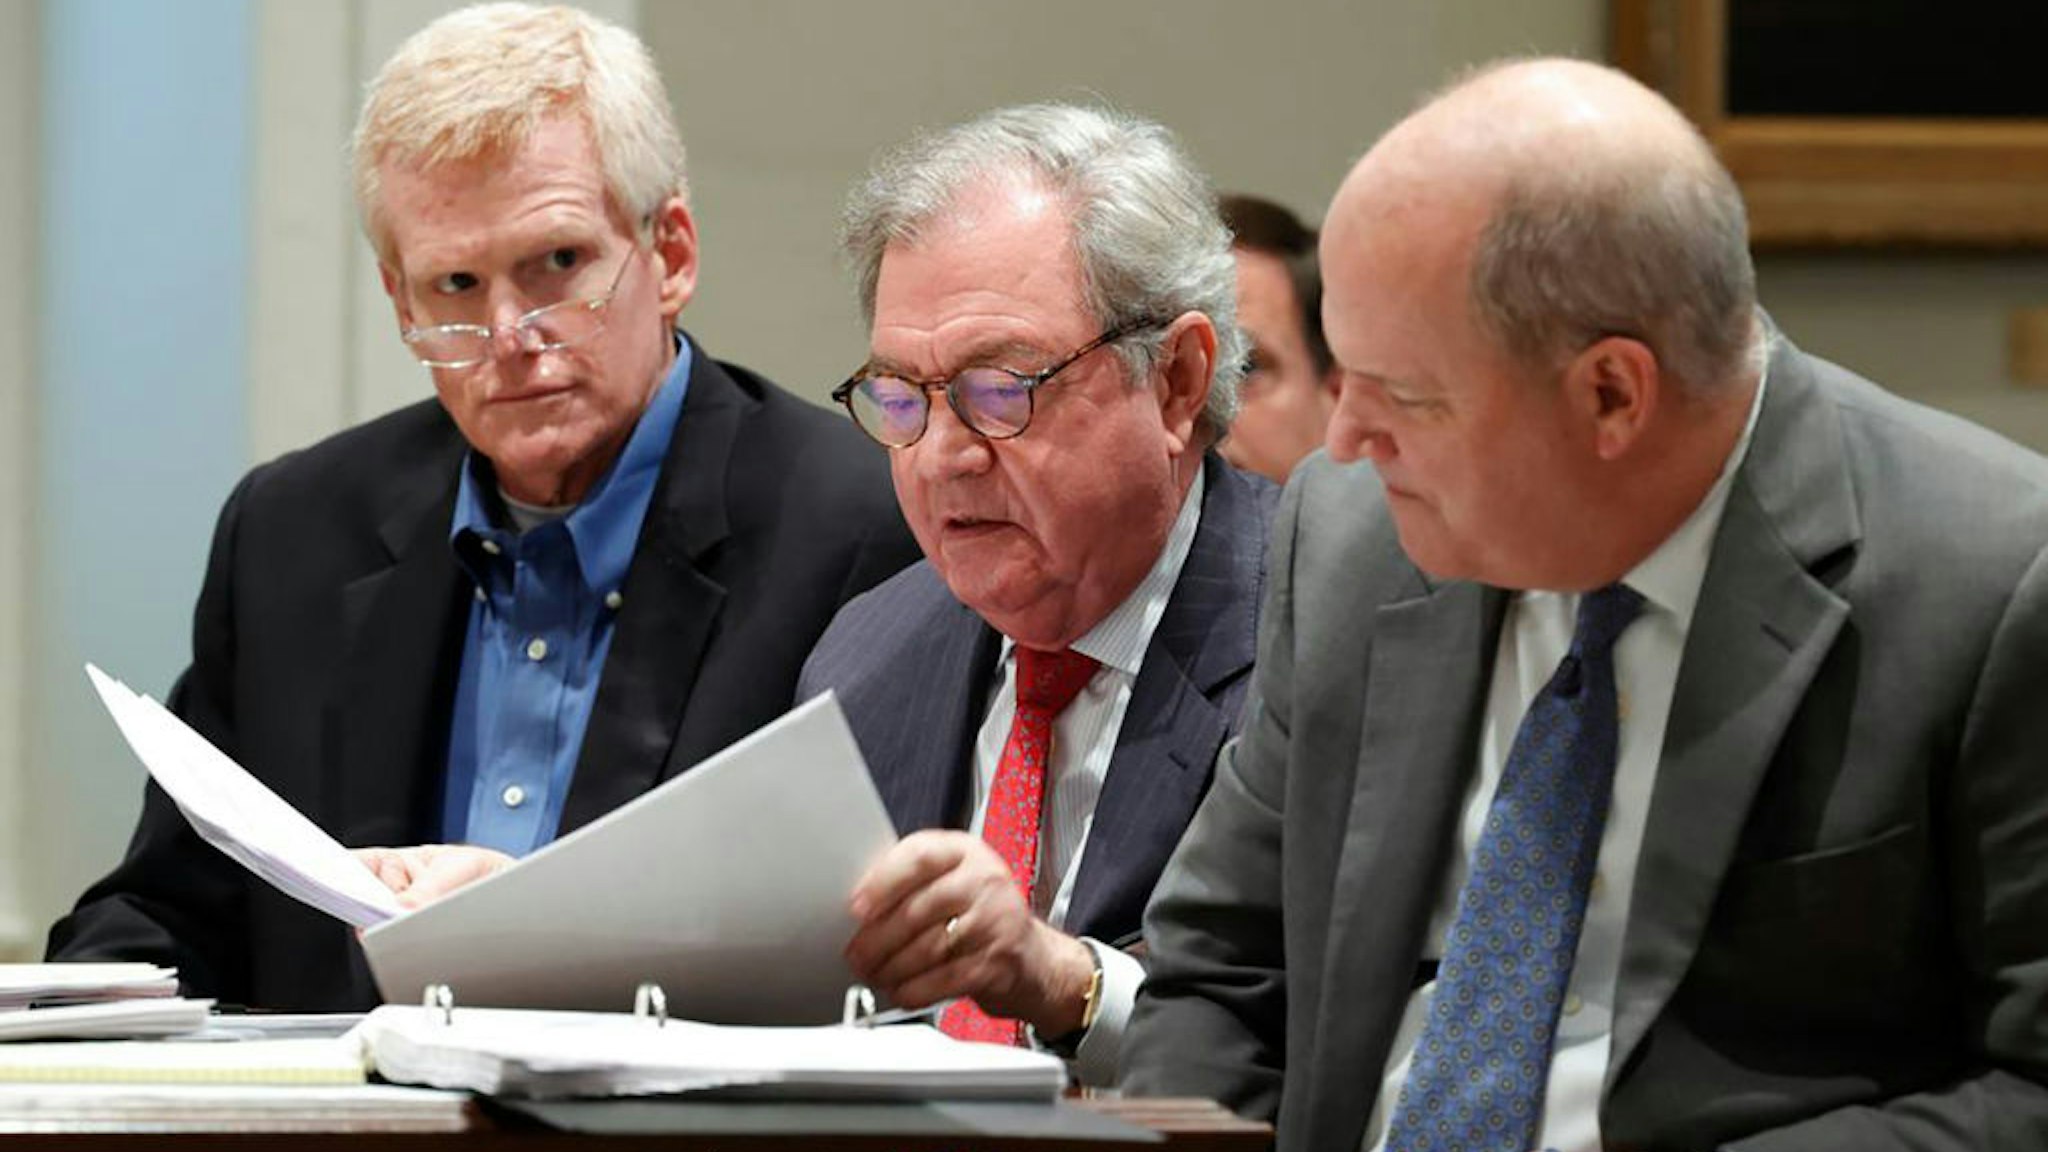 Alex Murdaugh sits in the Colleton County Courthouse with his legal team including Dick Harpootlian, middle, and Jim Griffin, right, as his attorneys discuss motions in front of Judge Clifton Newman in a December hearing.